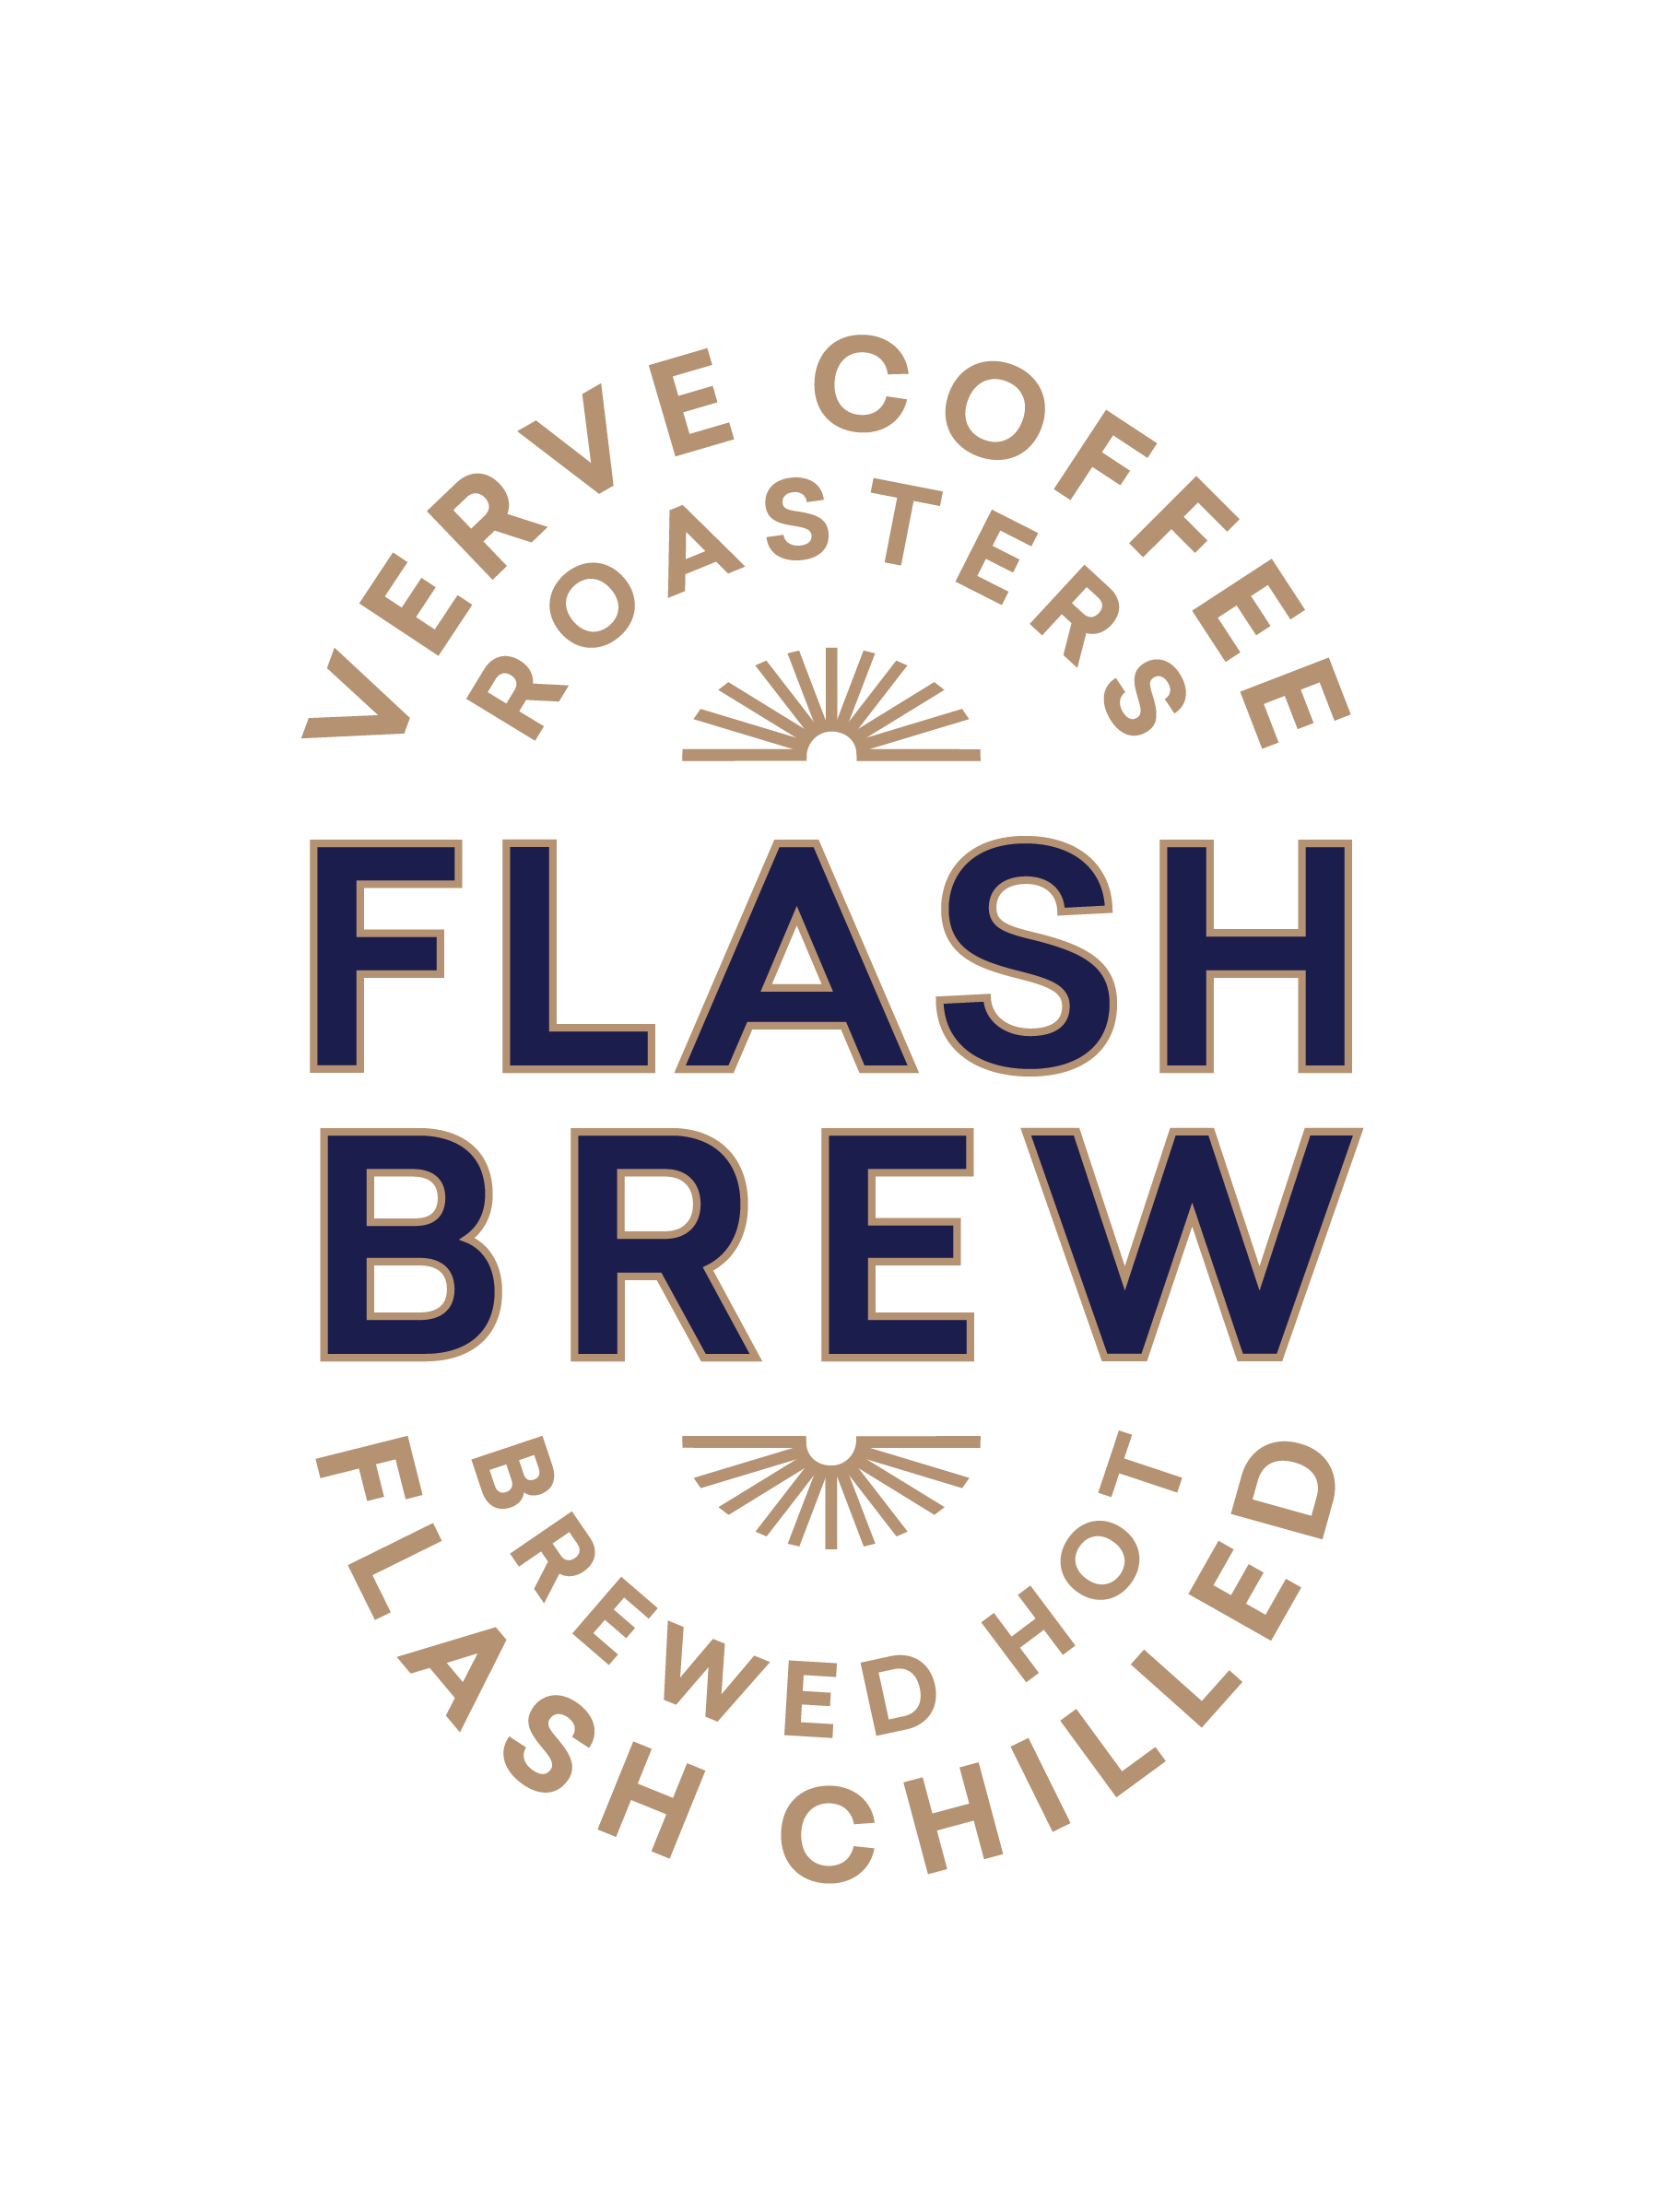 Verve's New Flash Brew Coffee Creates and Instantly Recognizable System ...